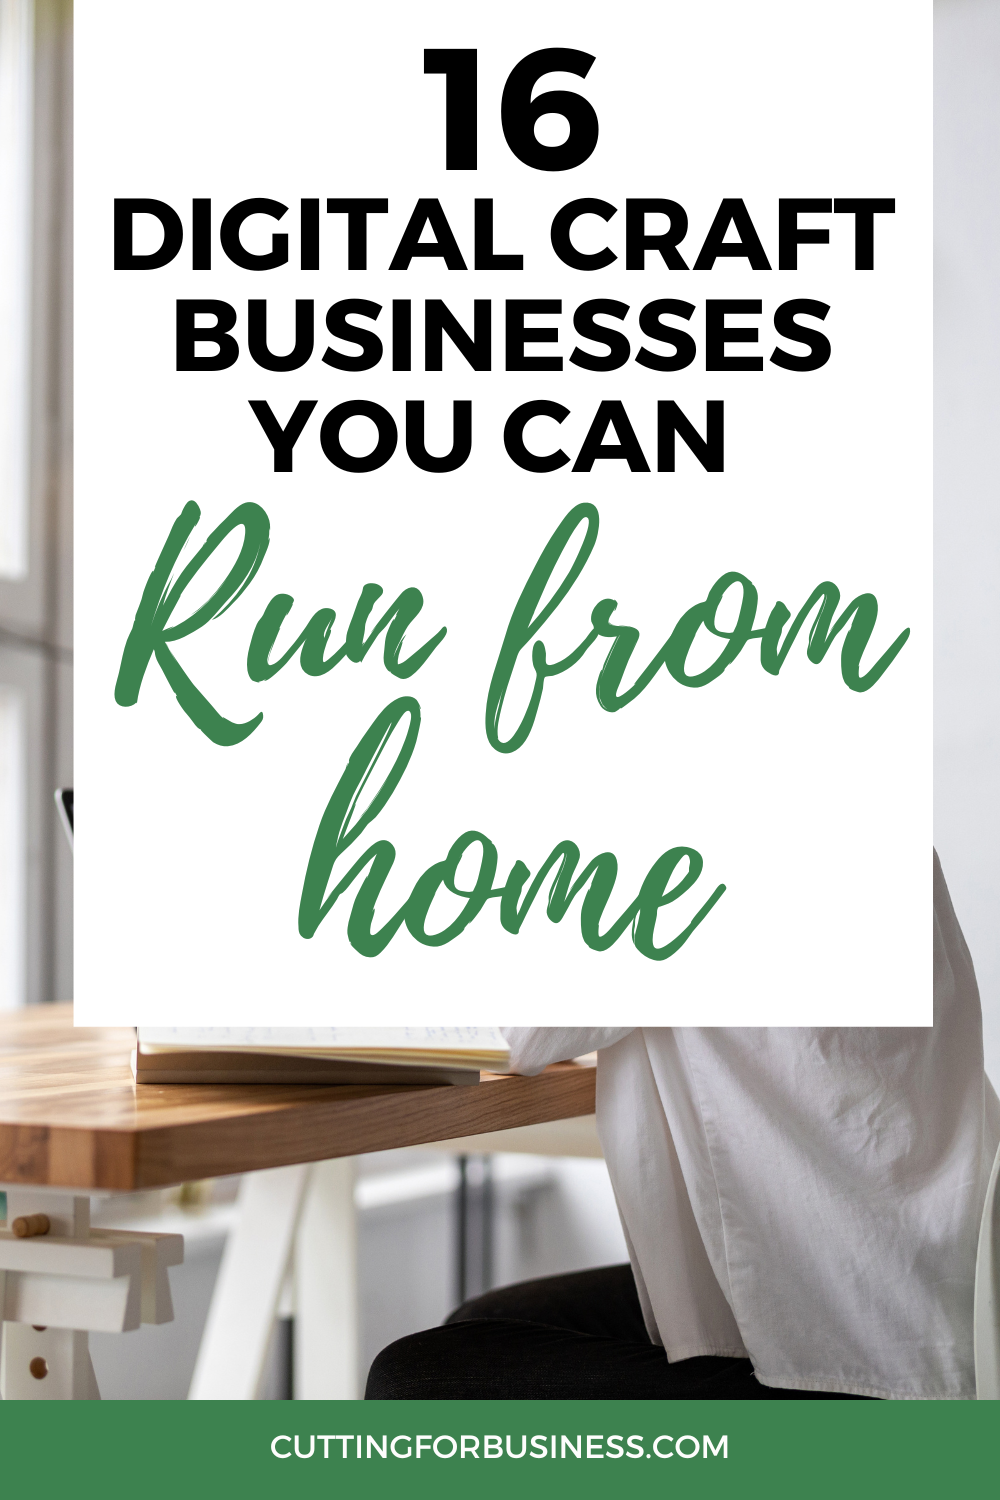 16 Digital Craft Businesses You Can Run from Home - cuttingforbusiness.com.